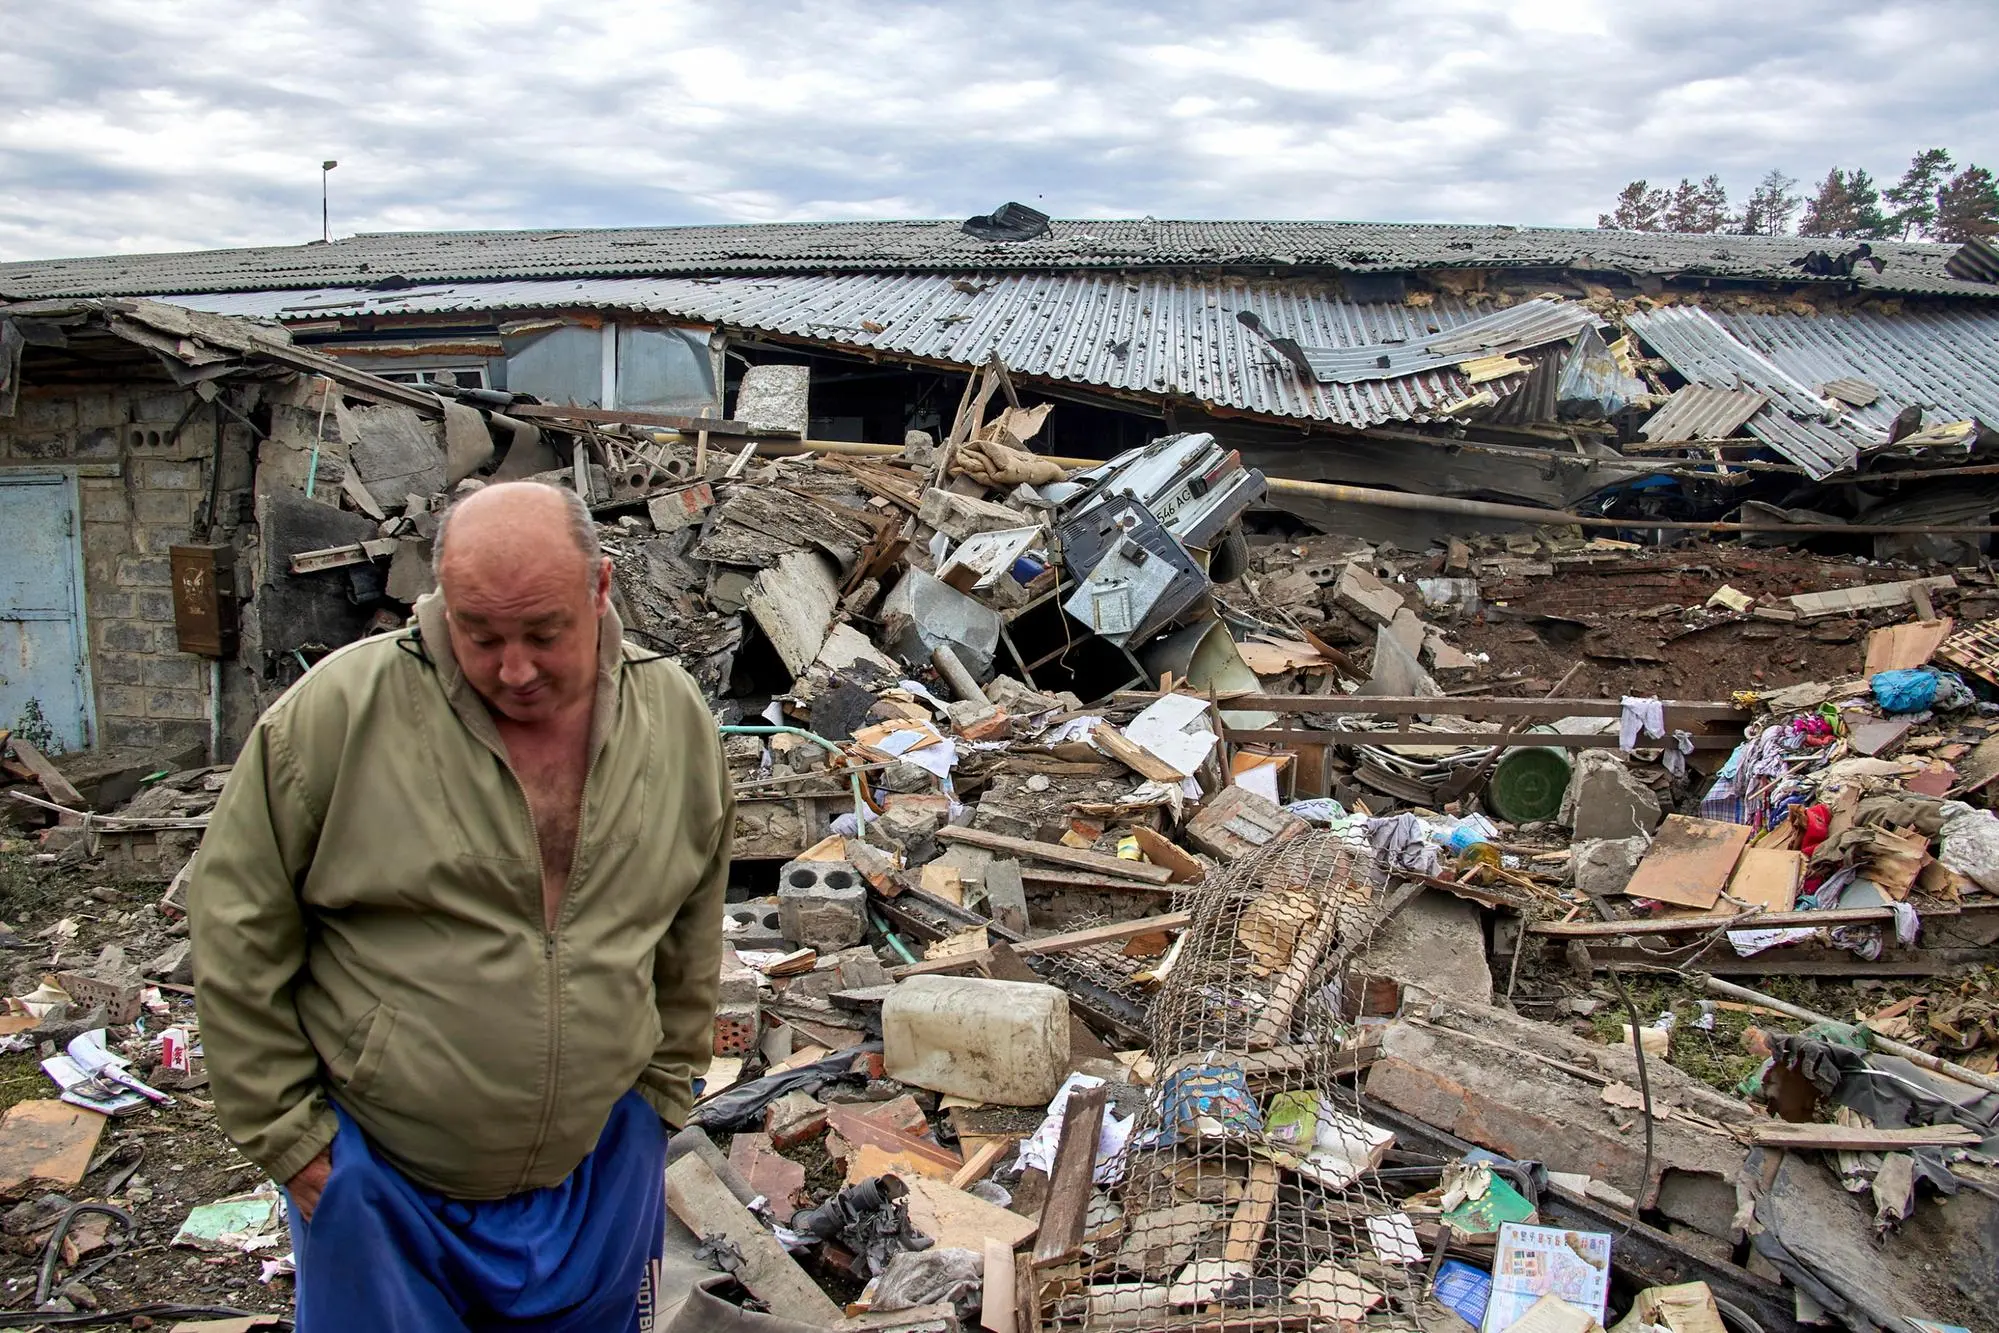 epa10102842 A local man inspects a private building damaged in a rocket hit near Chuhuiv, Kharkiv area, Ukraine, 02 August 2022. Kharkiv and surrounding areas have been the target of heavy shelling since February 2022, when Russian troops entered Ukraine starting a conflict that has provoked destruction and a humanitarian crisis. EPA/SERGEY KOZLOV